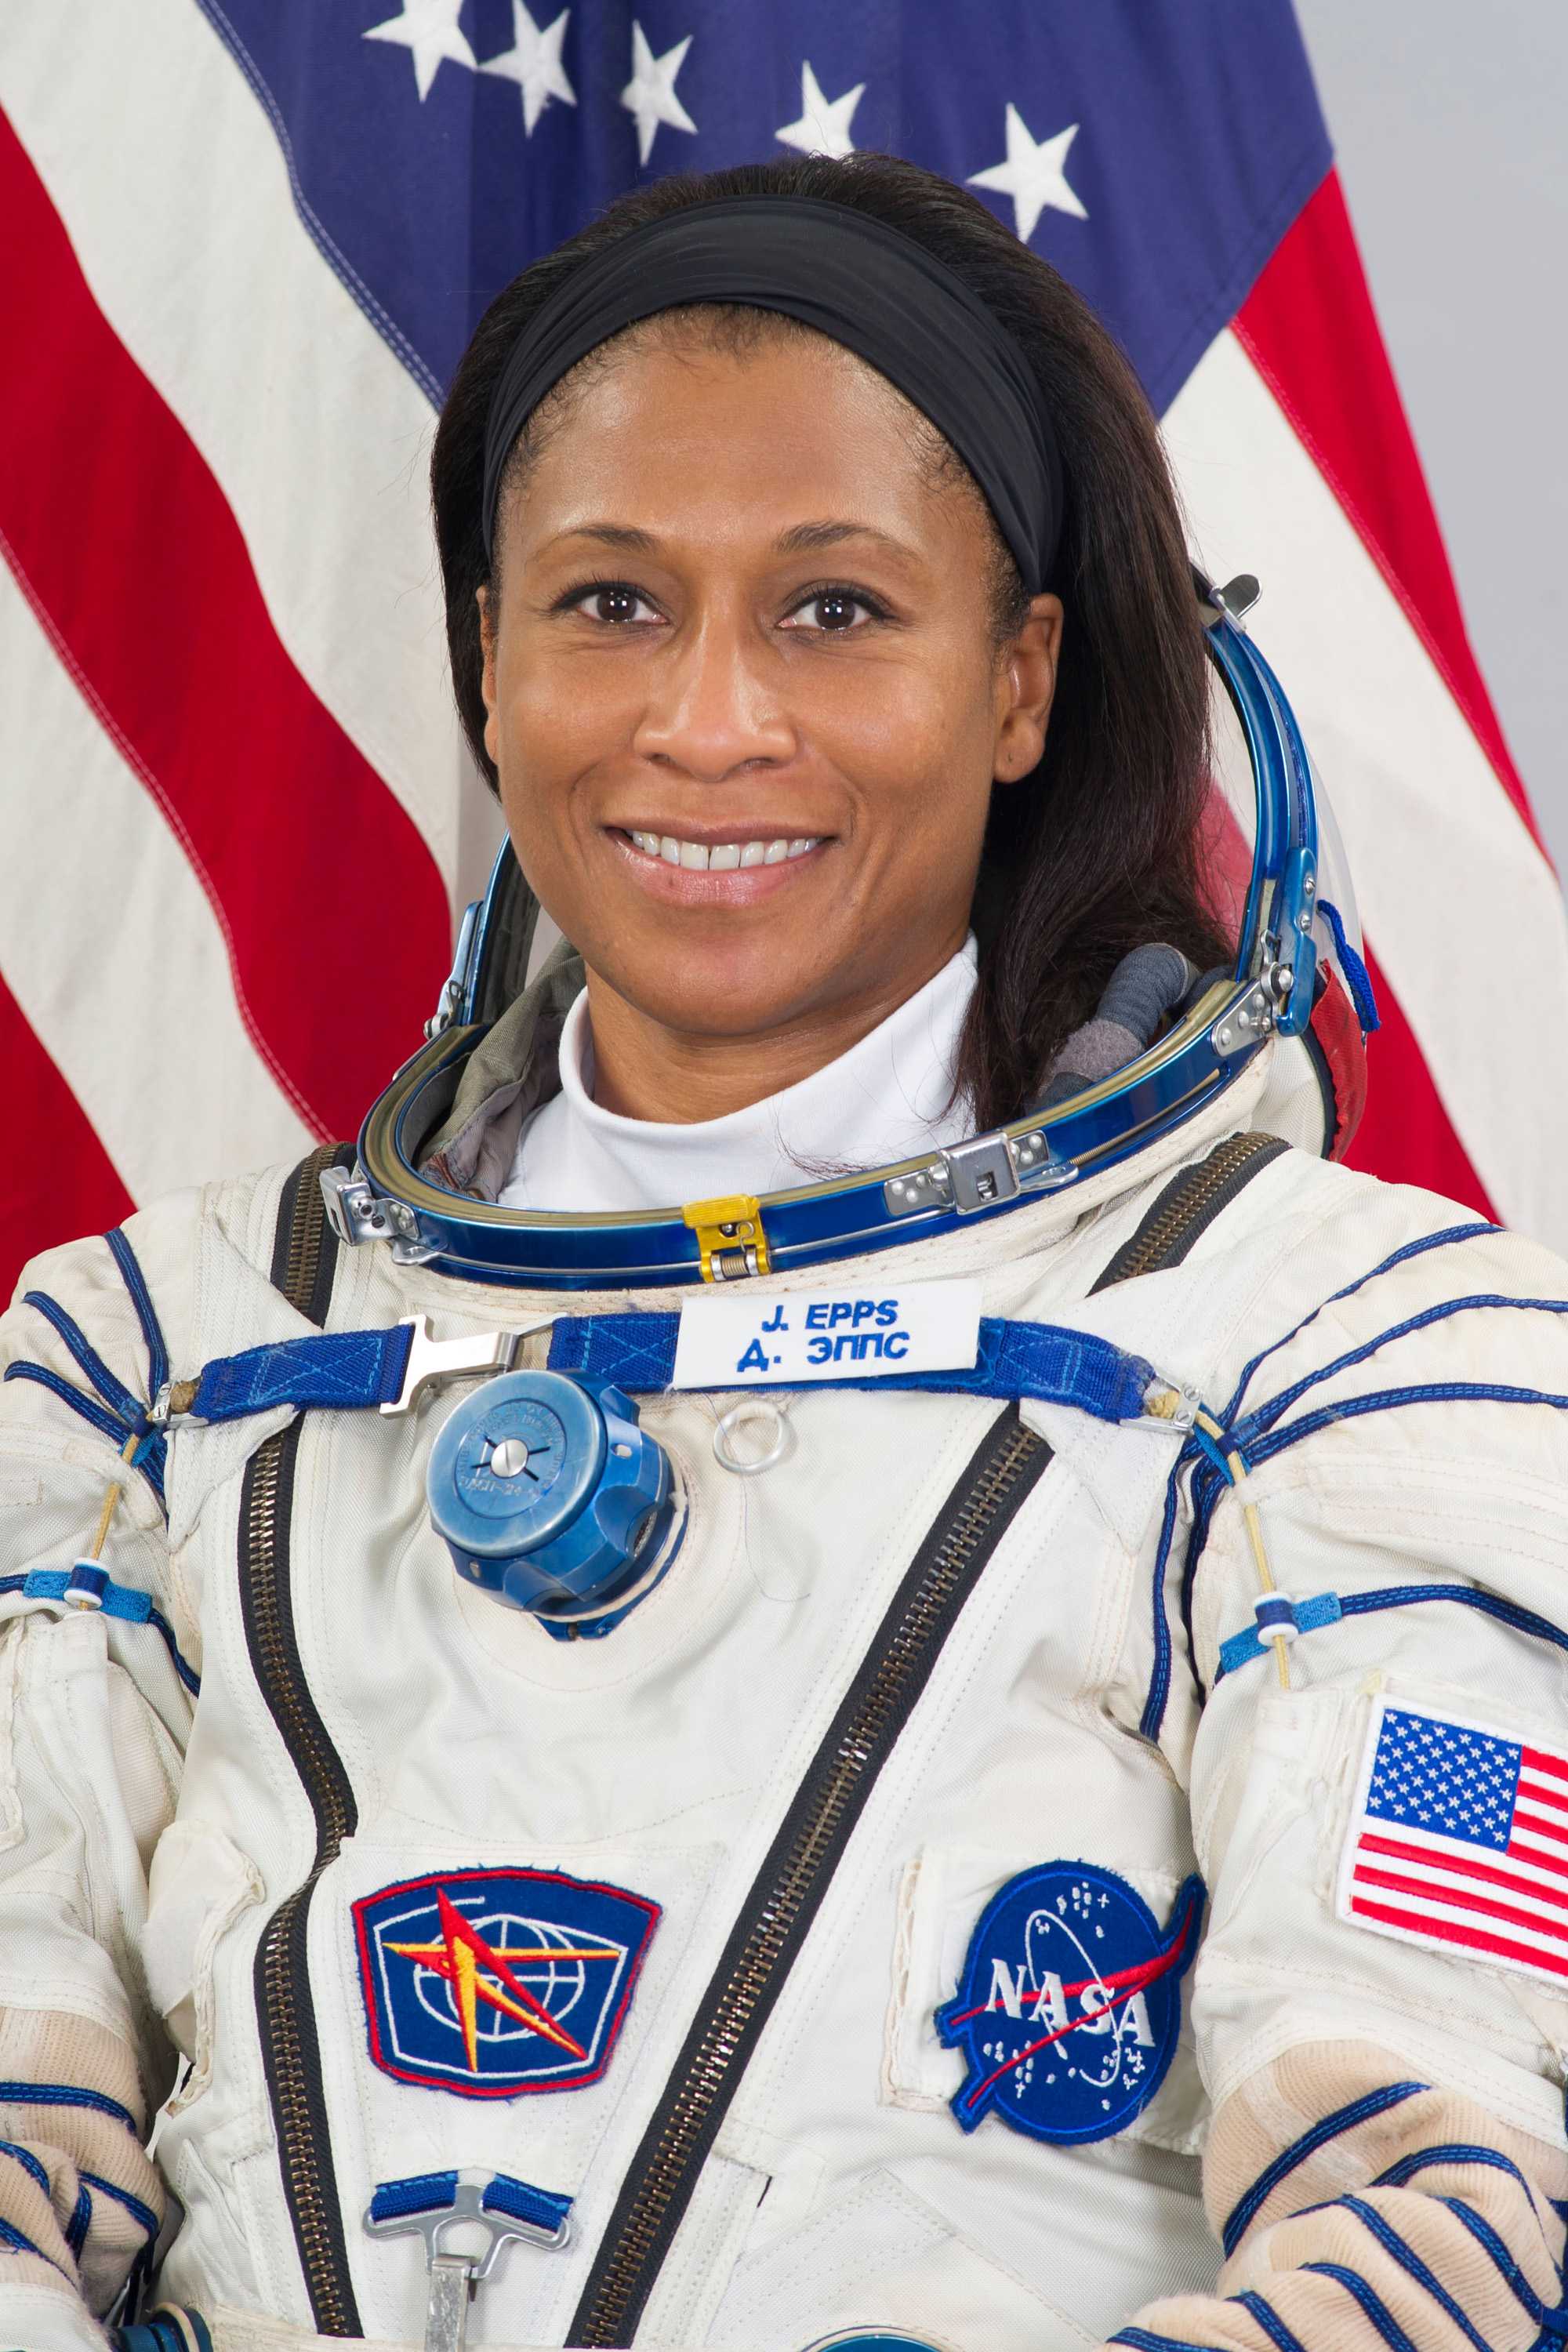 Jeanette Epps is wearing a white space suit with NASA logos and patches while smiling for a portrait.